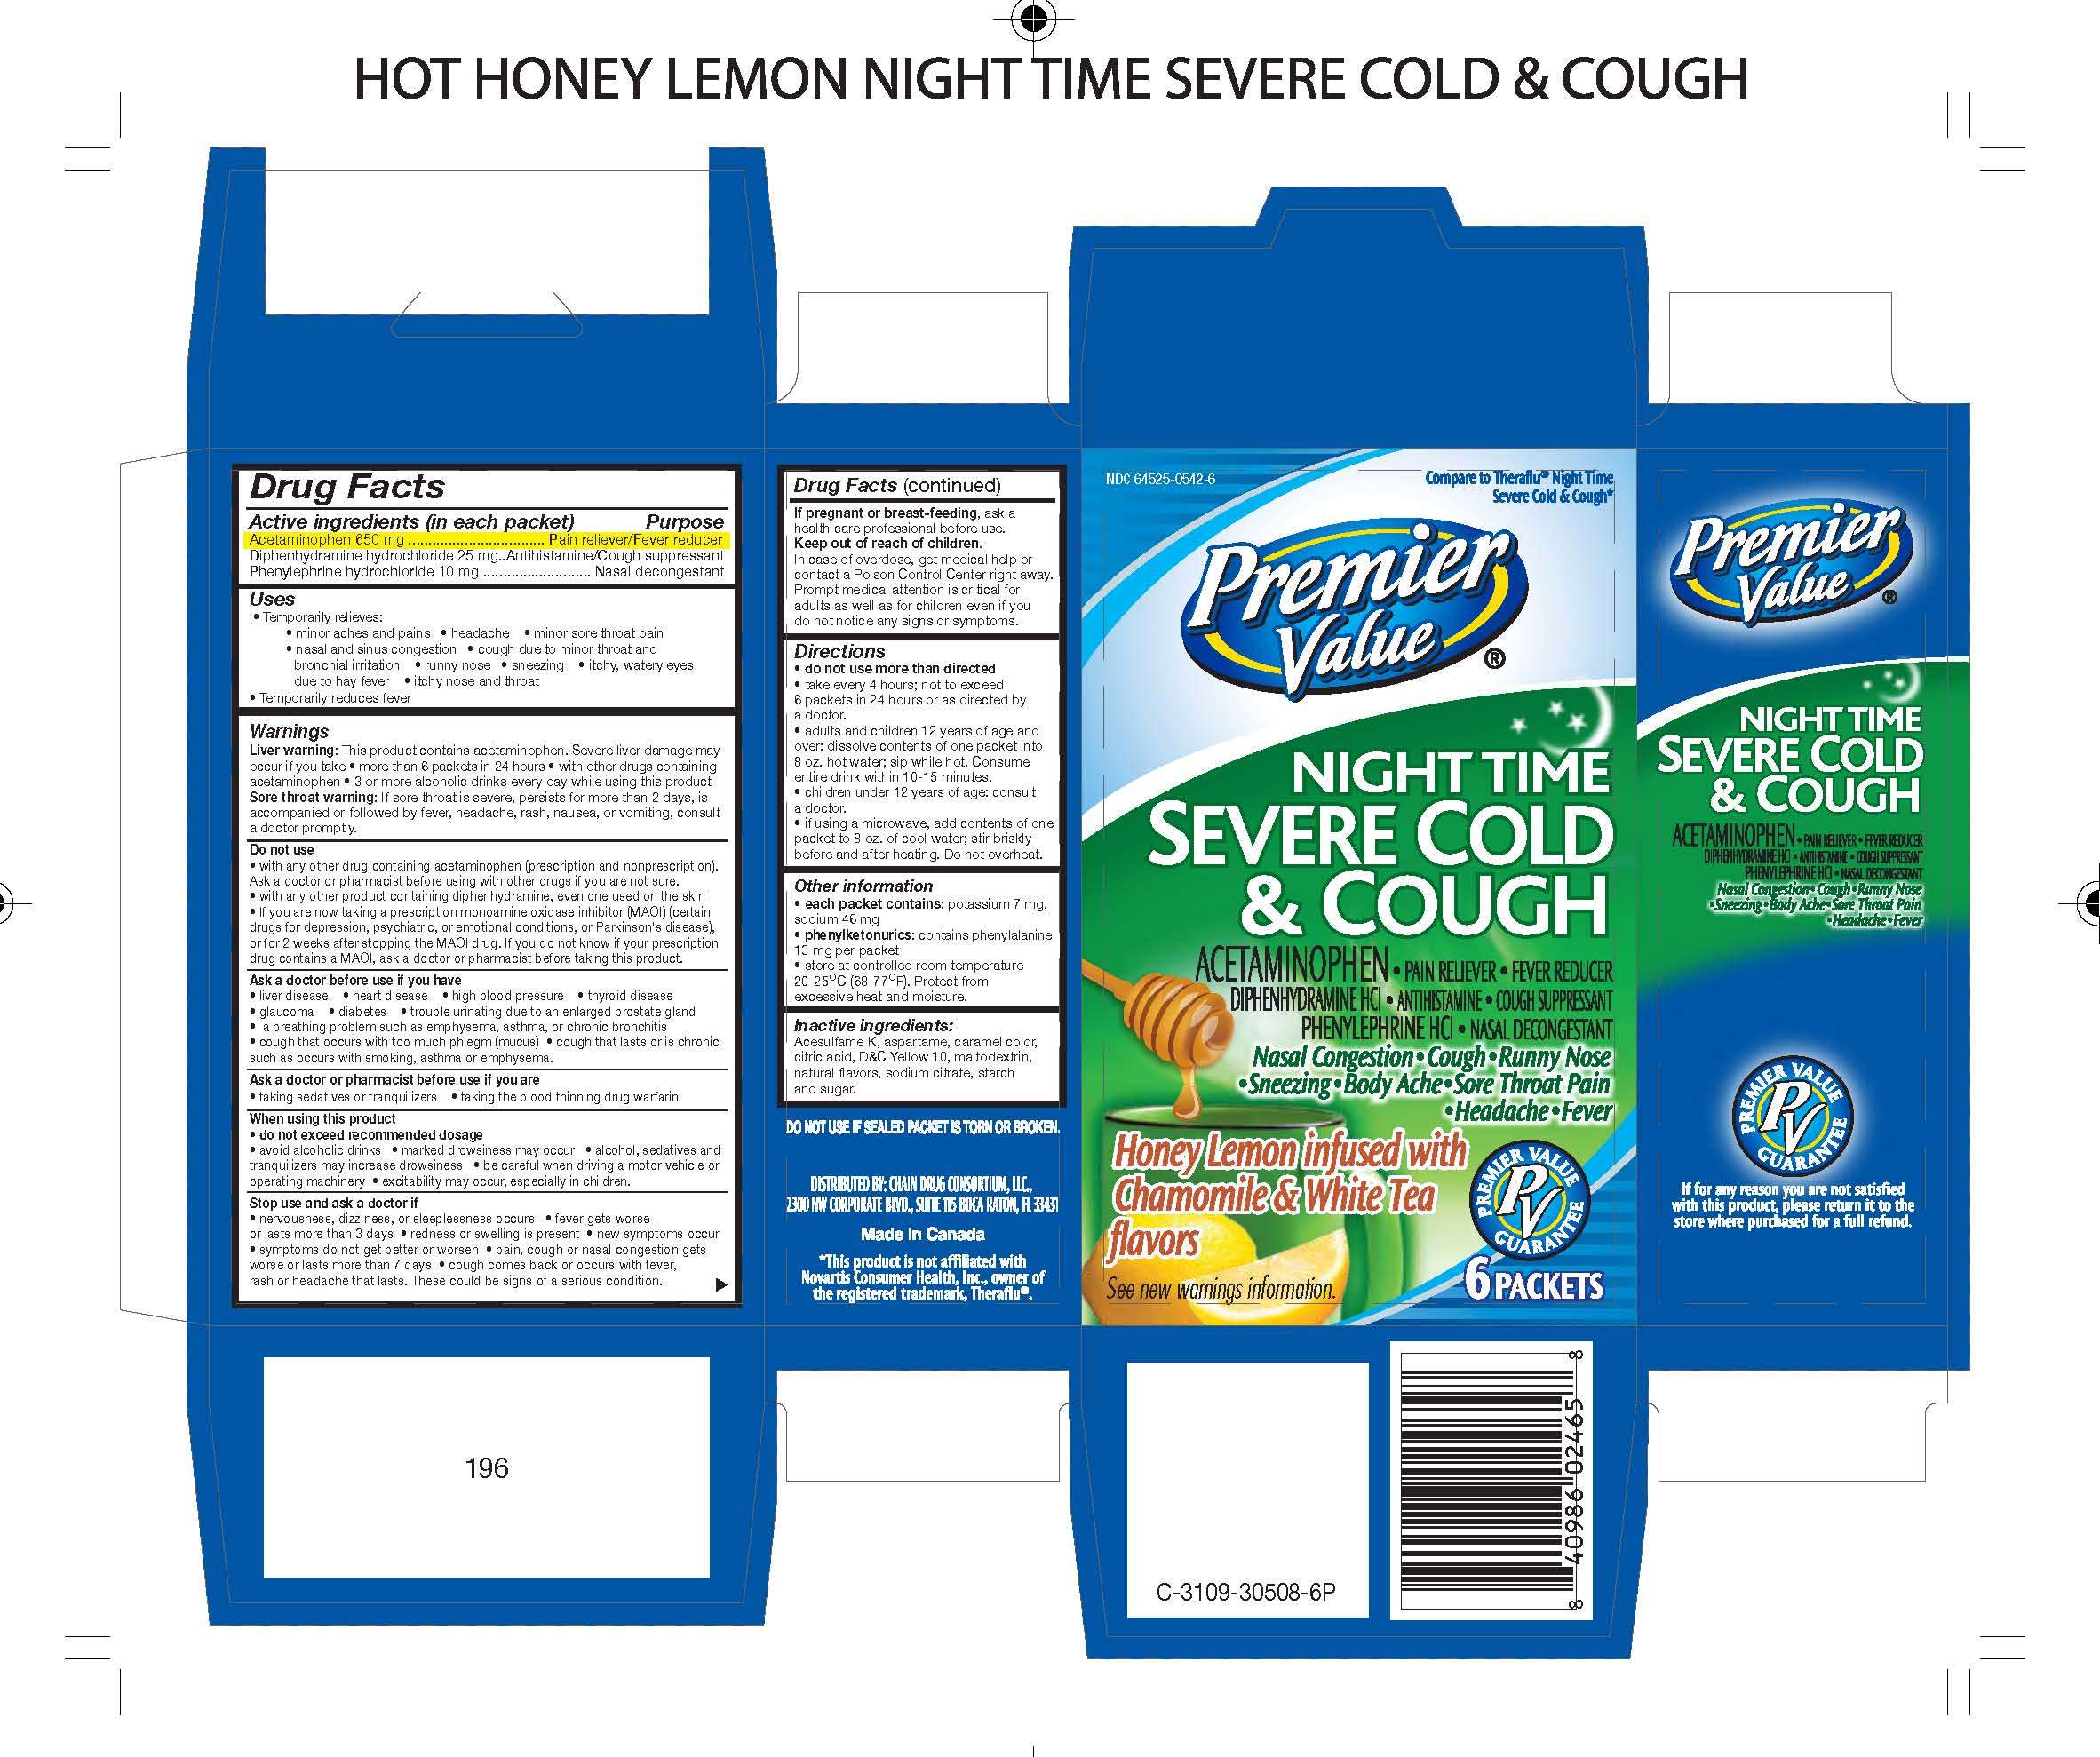 Premier Value night time severe cold and cough